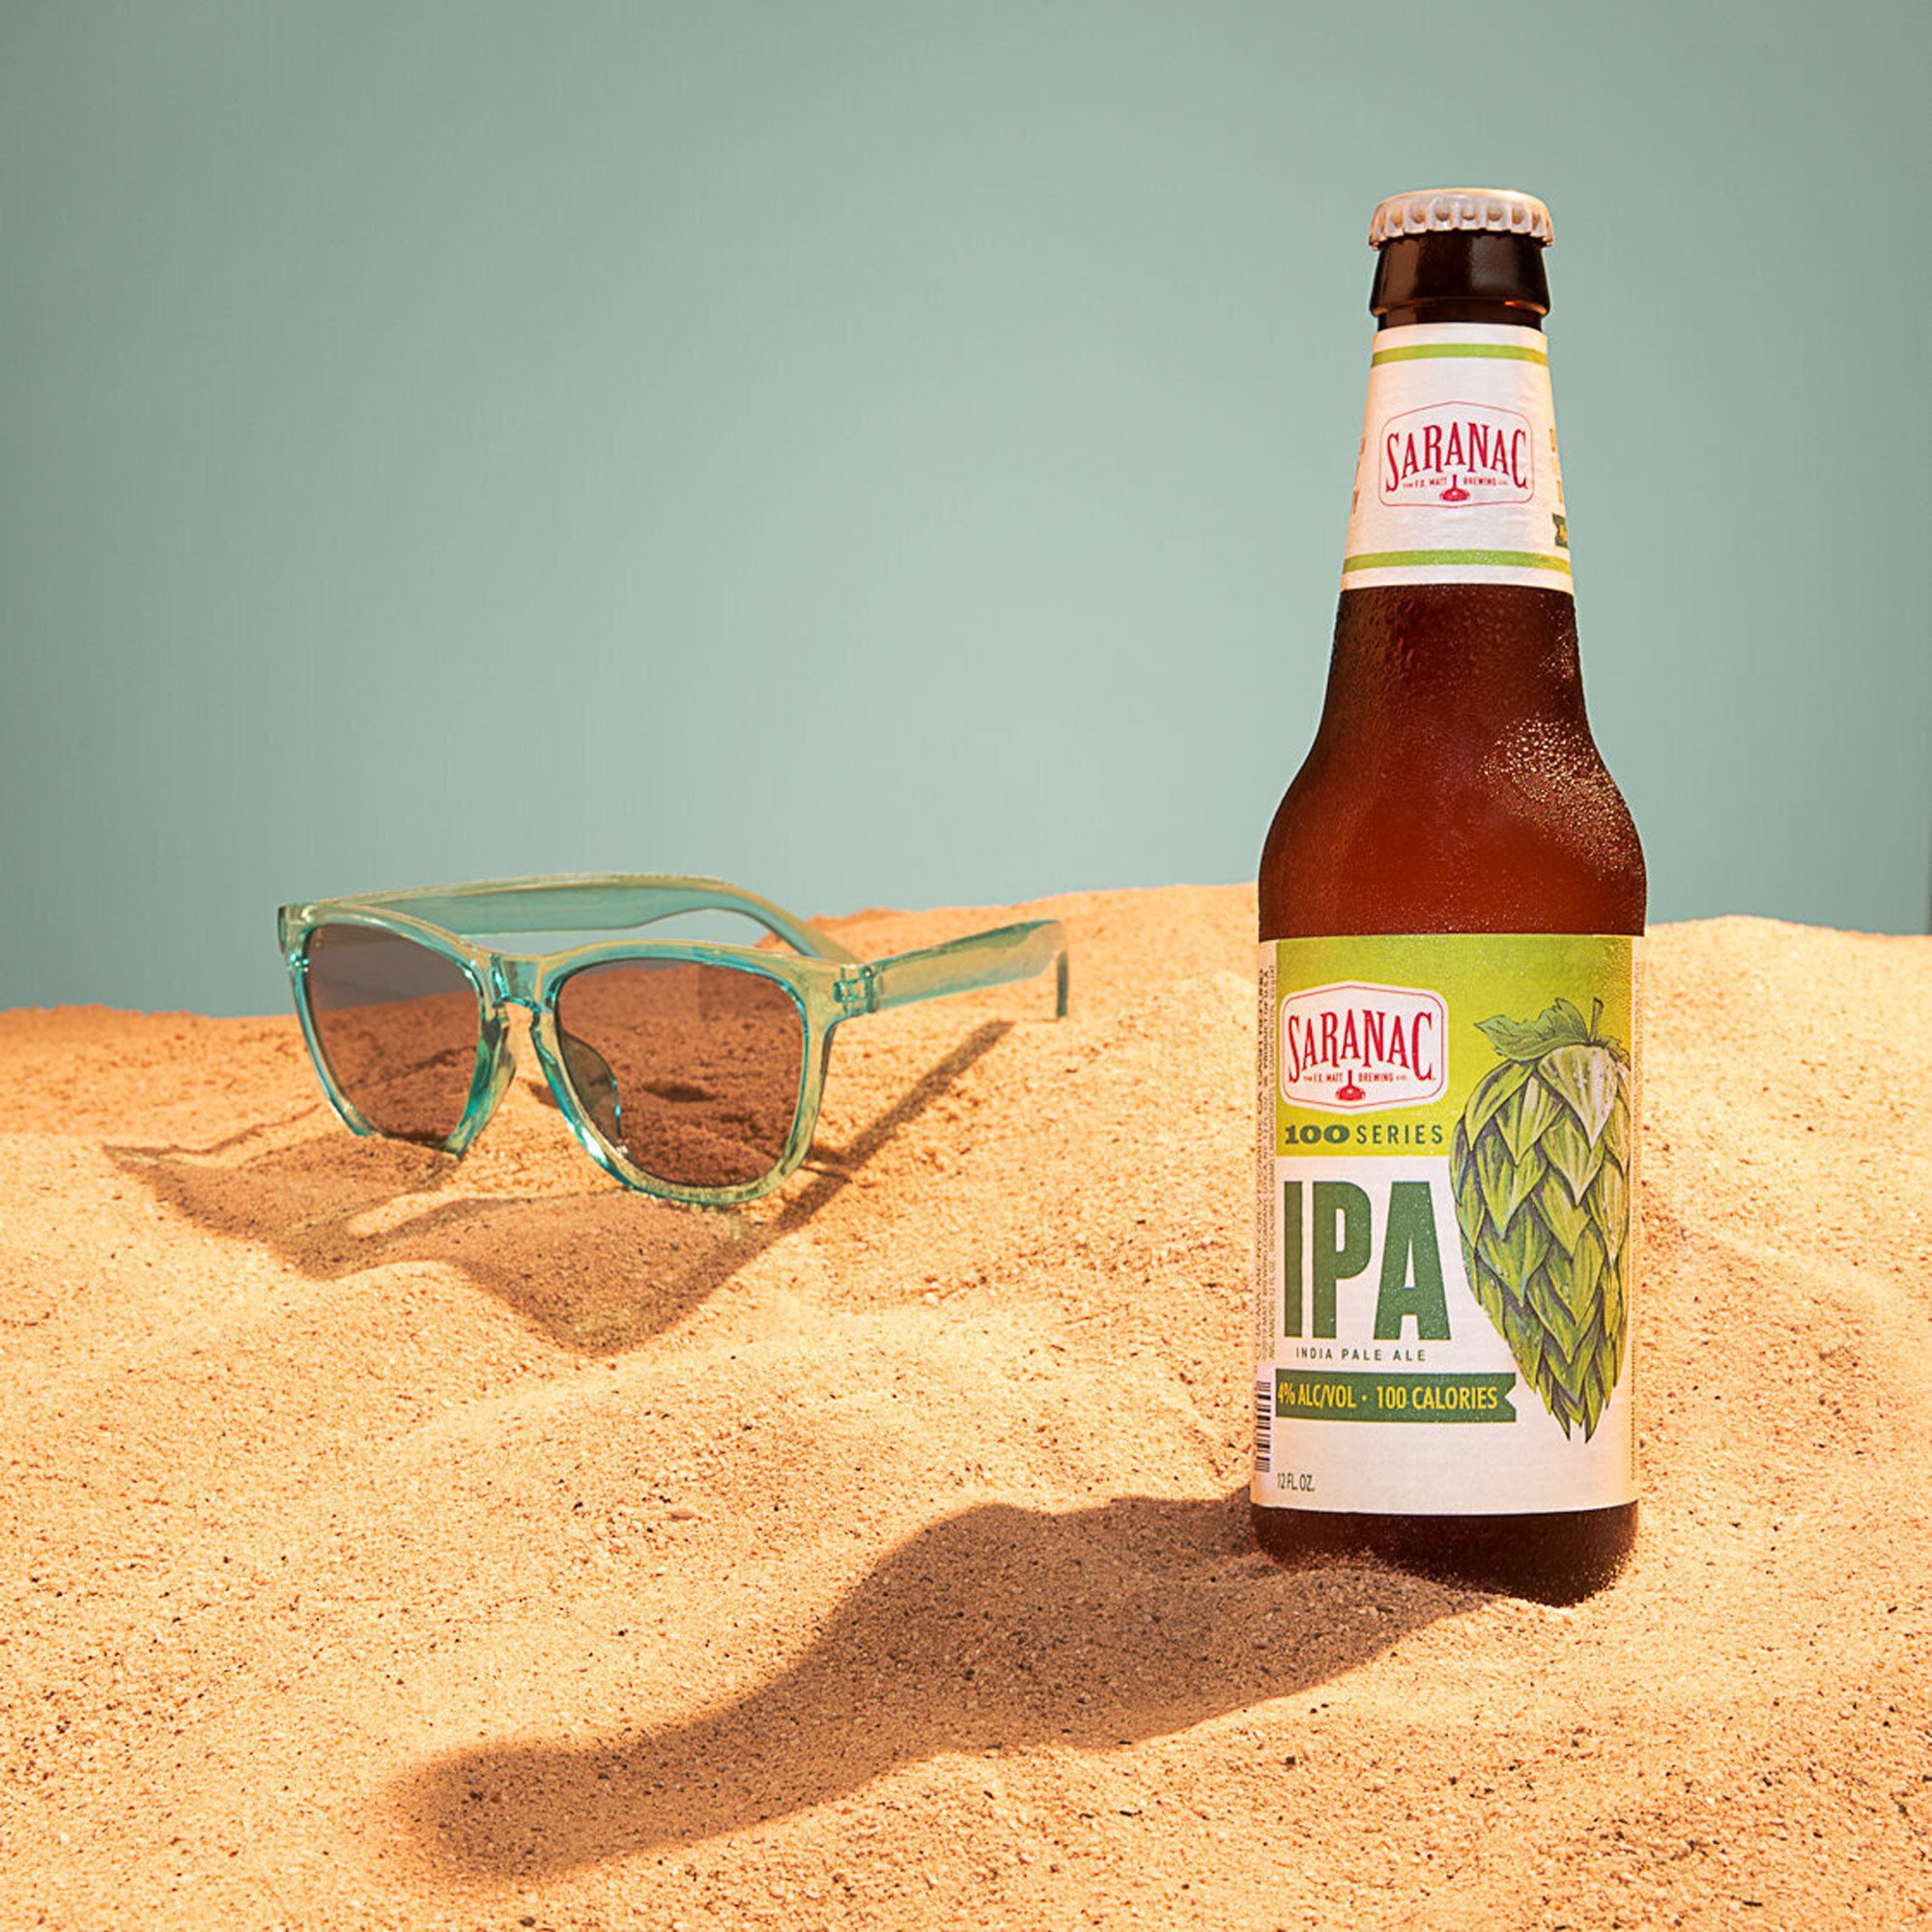  studio set design of a beach with sunglasses and a bottle of Saranac beer  